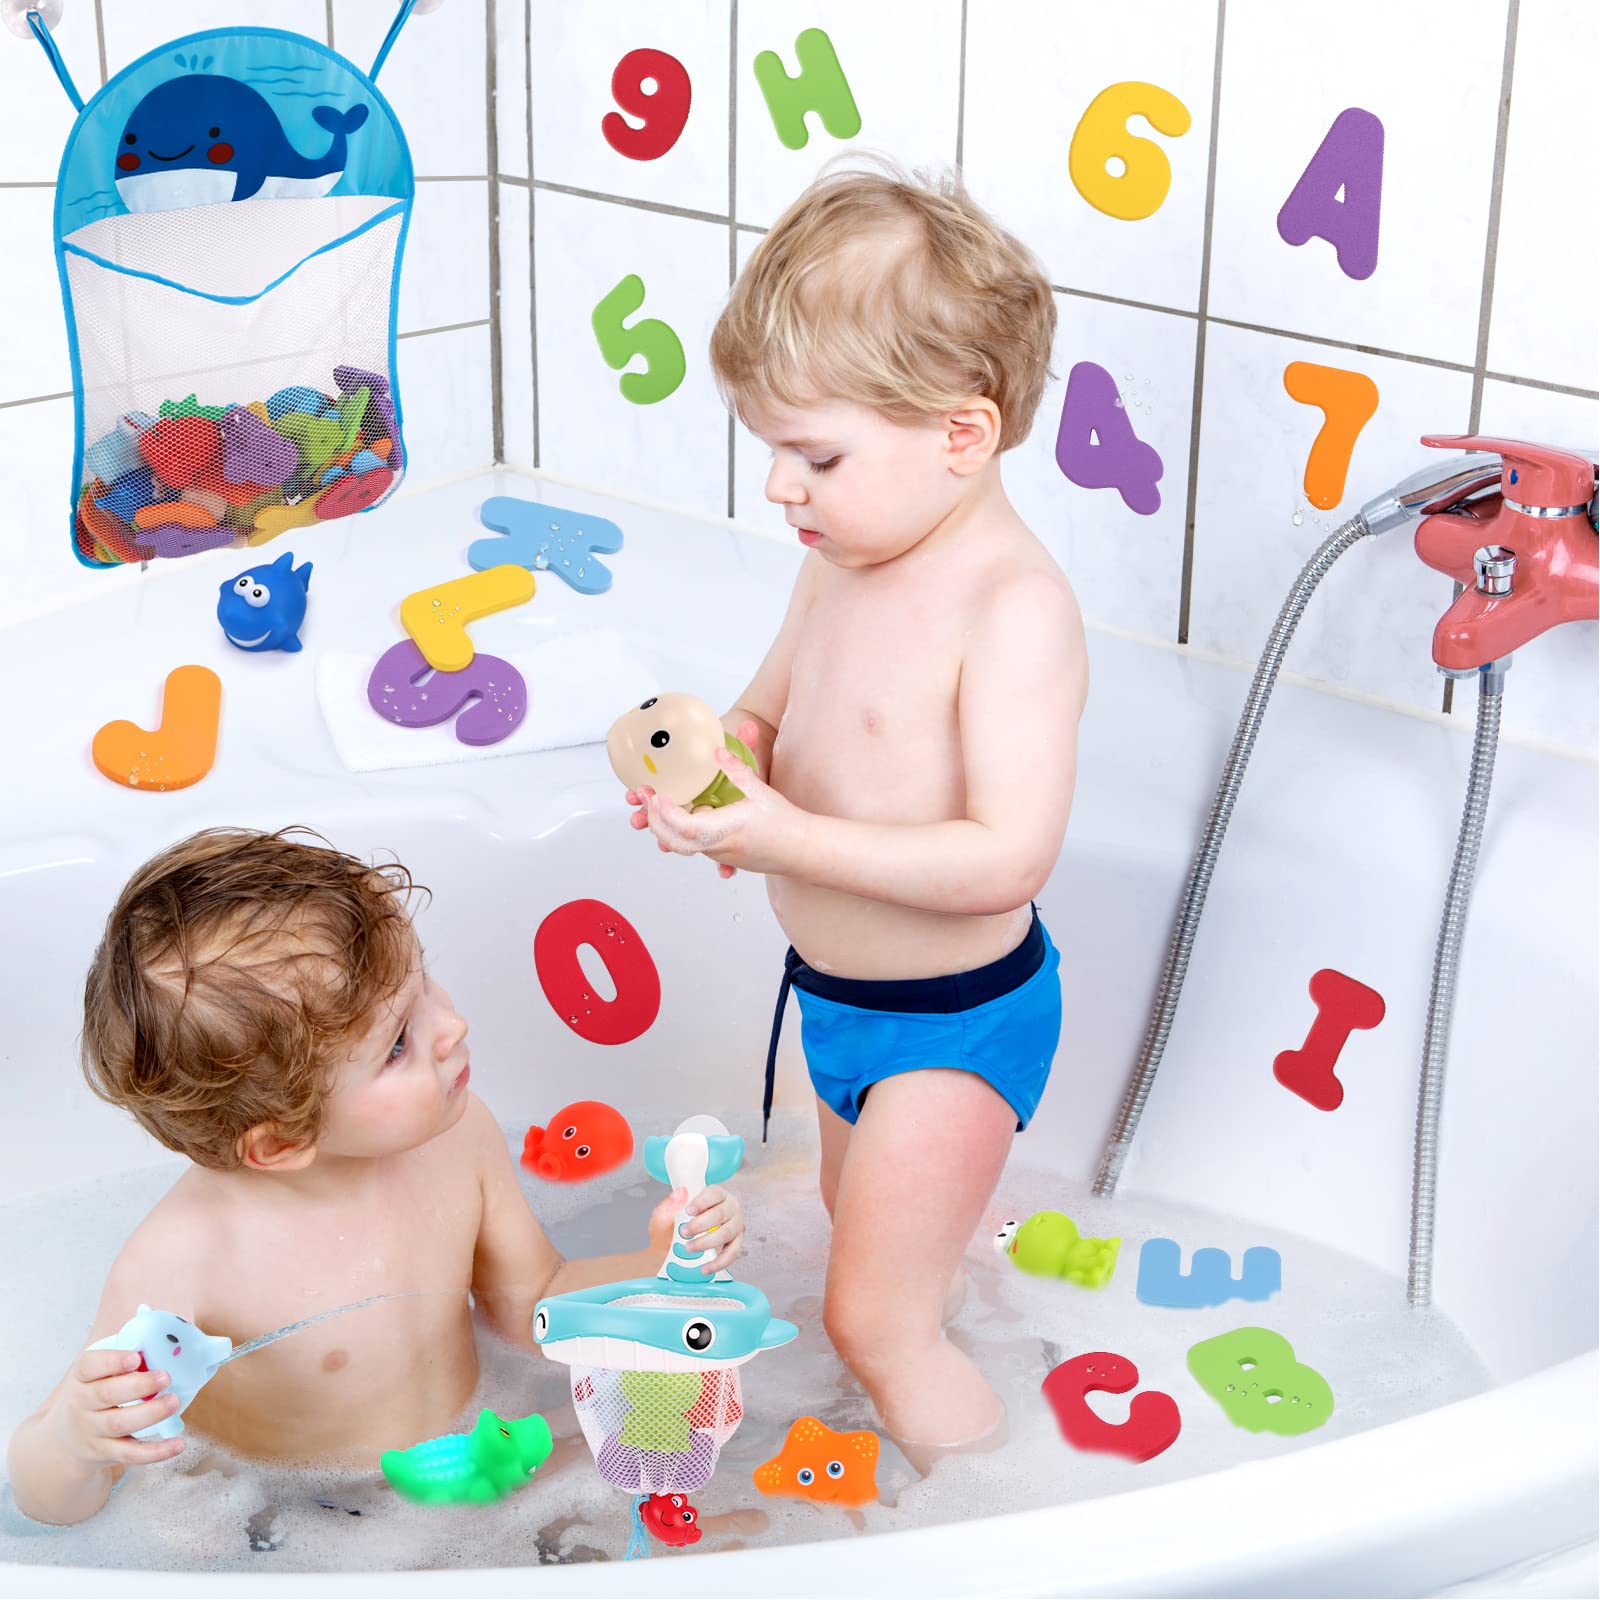 KaeKid Baby Bath Toys, 36 Foam Bath Letters & Numbers, Light up Bathtub Toys, Water Spray & Squeeze Bath Set with Fishing Net & Organizer Bag, Bath Water Toys for Kids Toddlers Gifts 3-6 Years Old